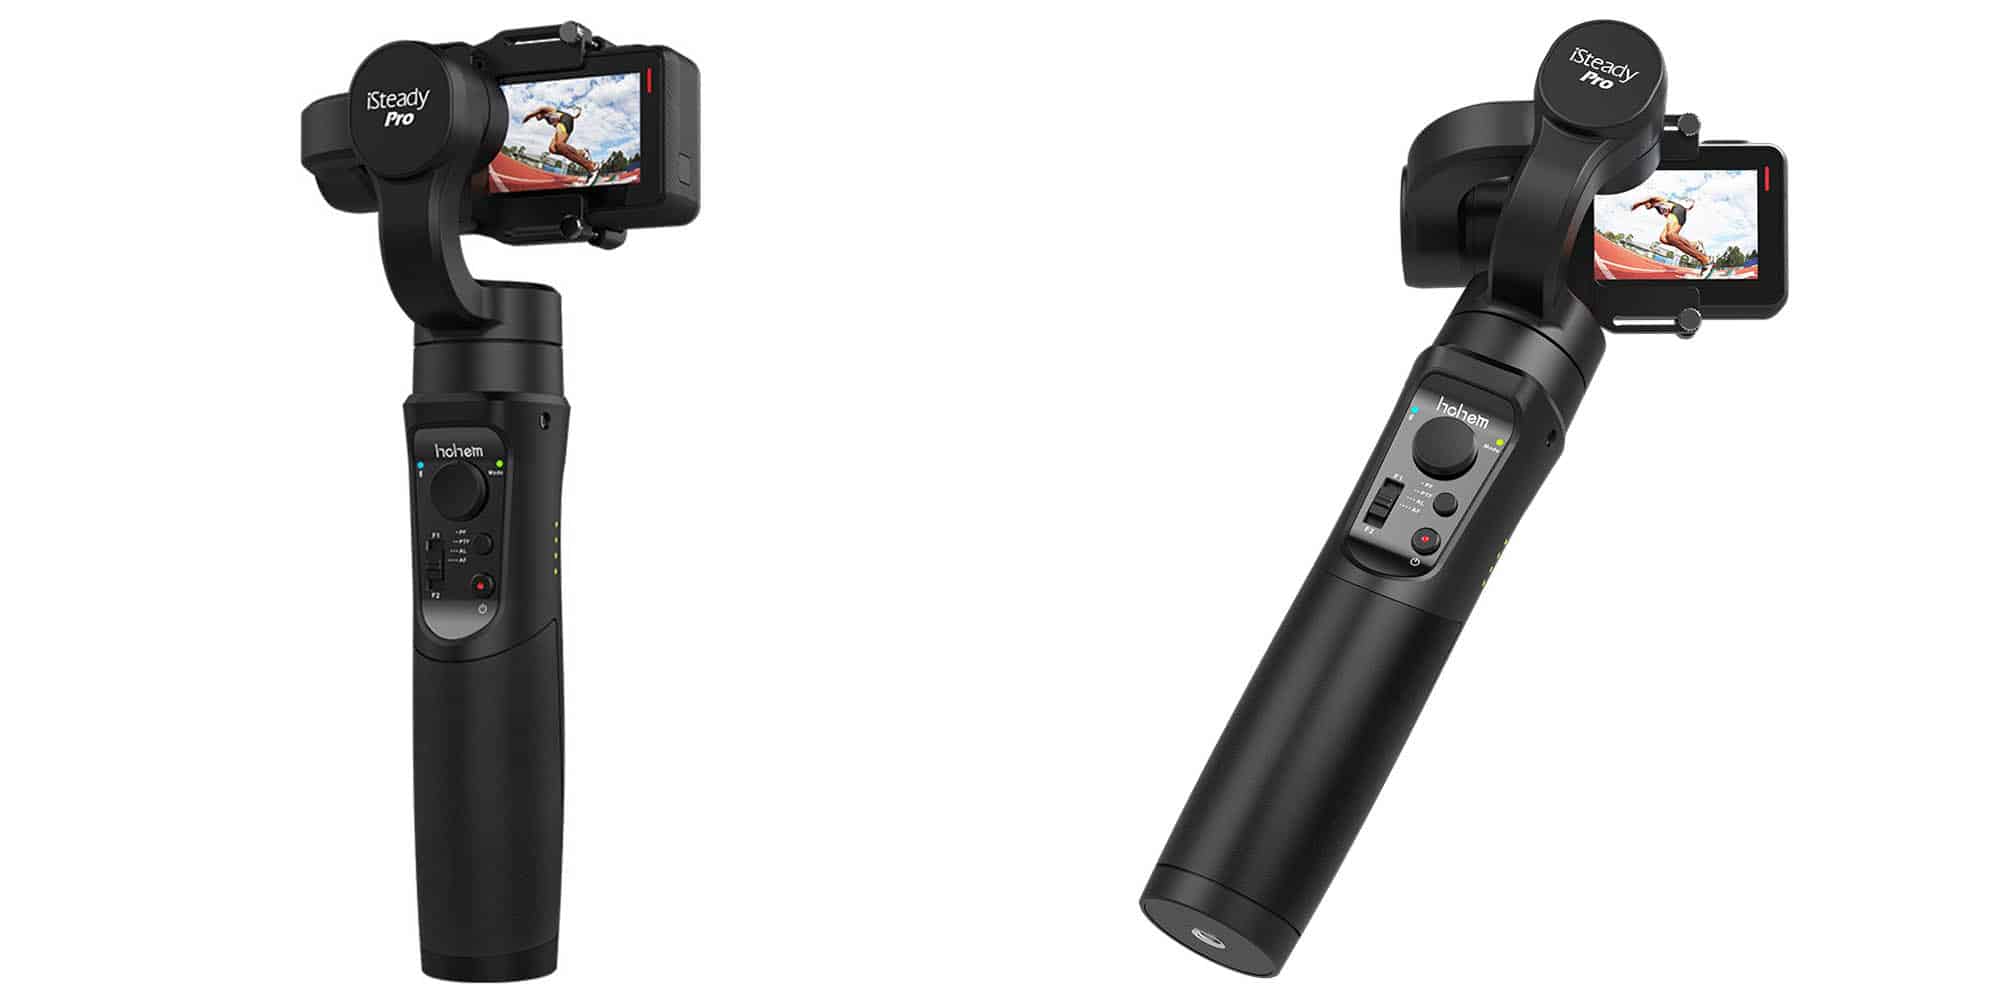 featured image for isteady pro gopro gimbal review